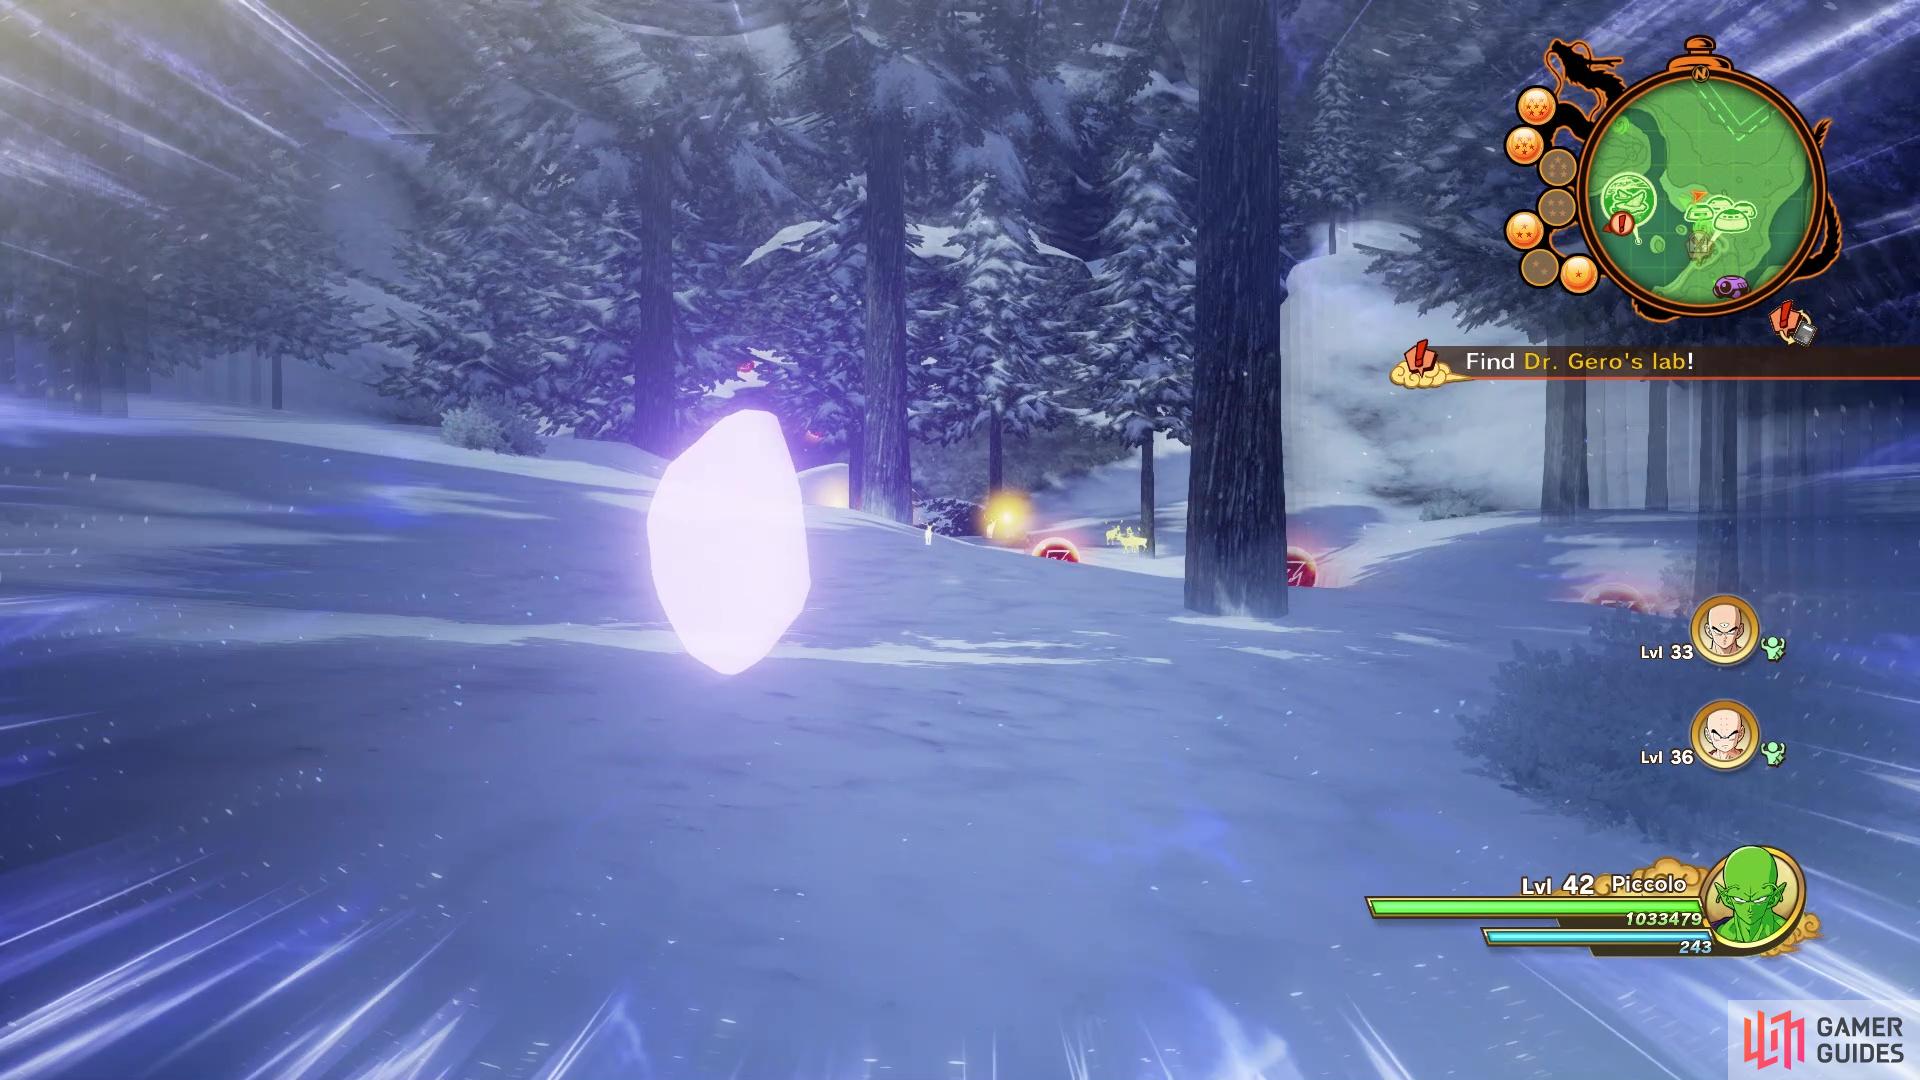 The large ice chunks that show up when Ki-searching will give you Frozen Rabbit Meat